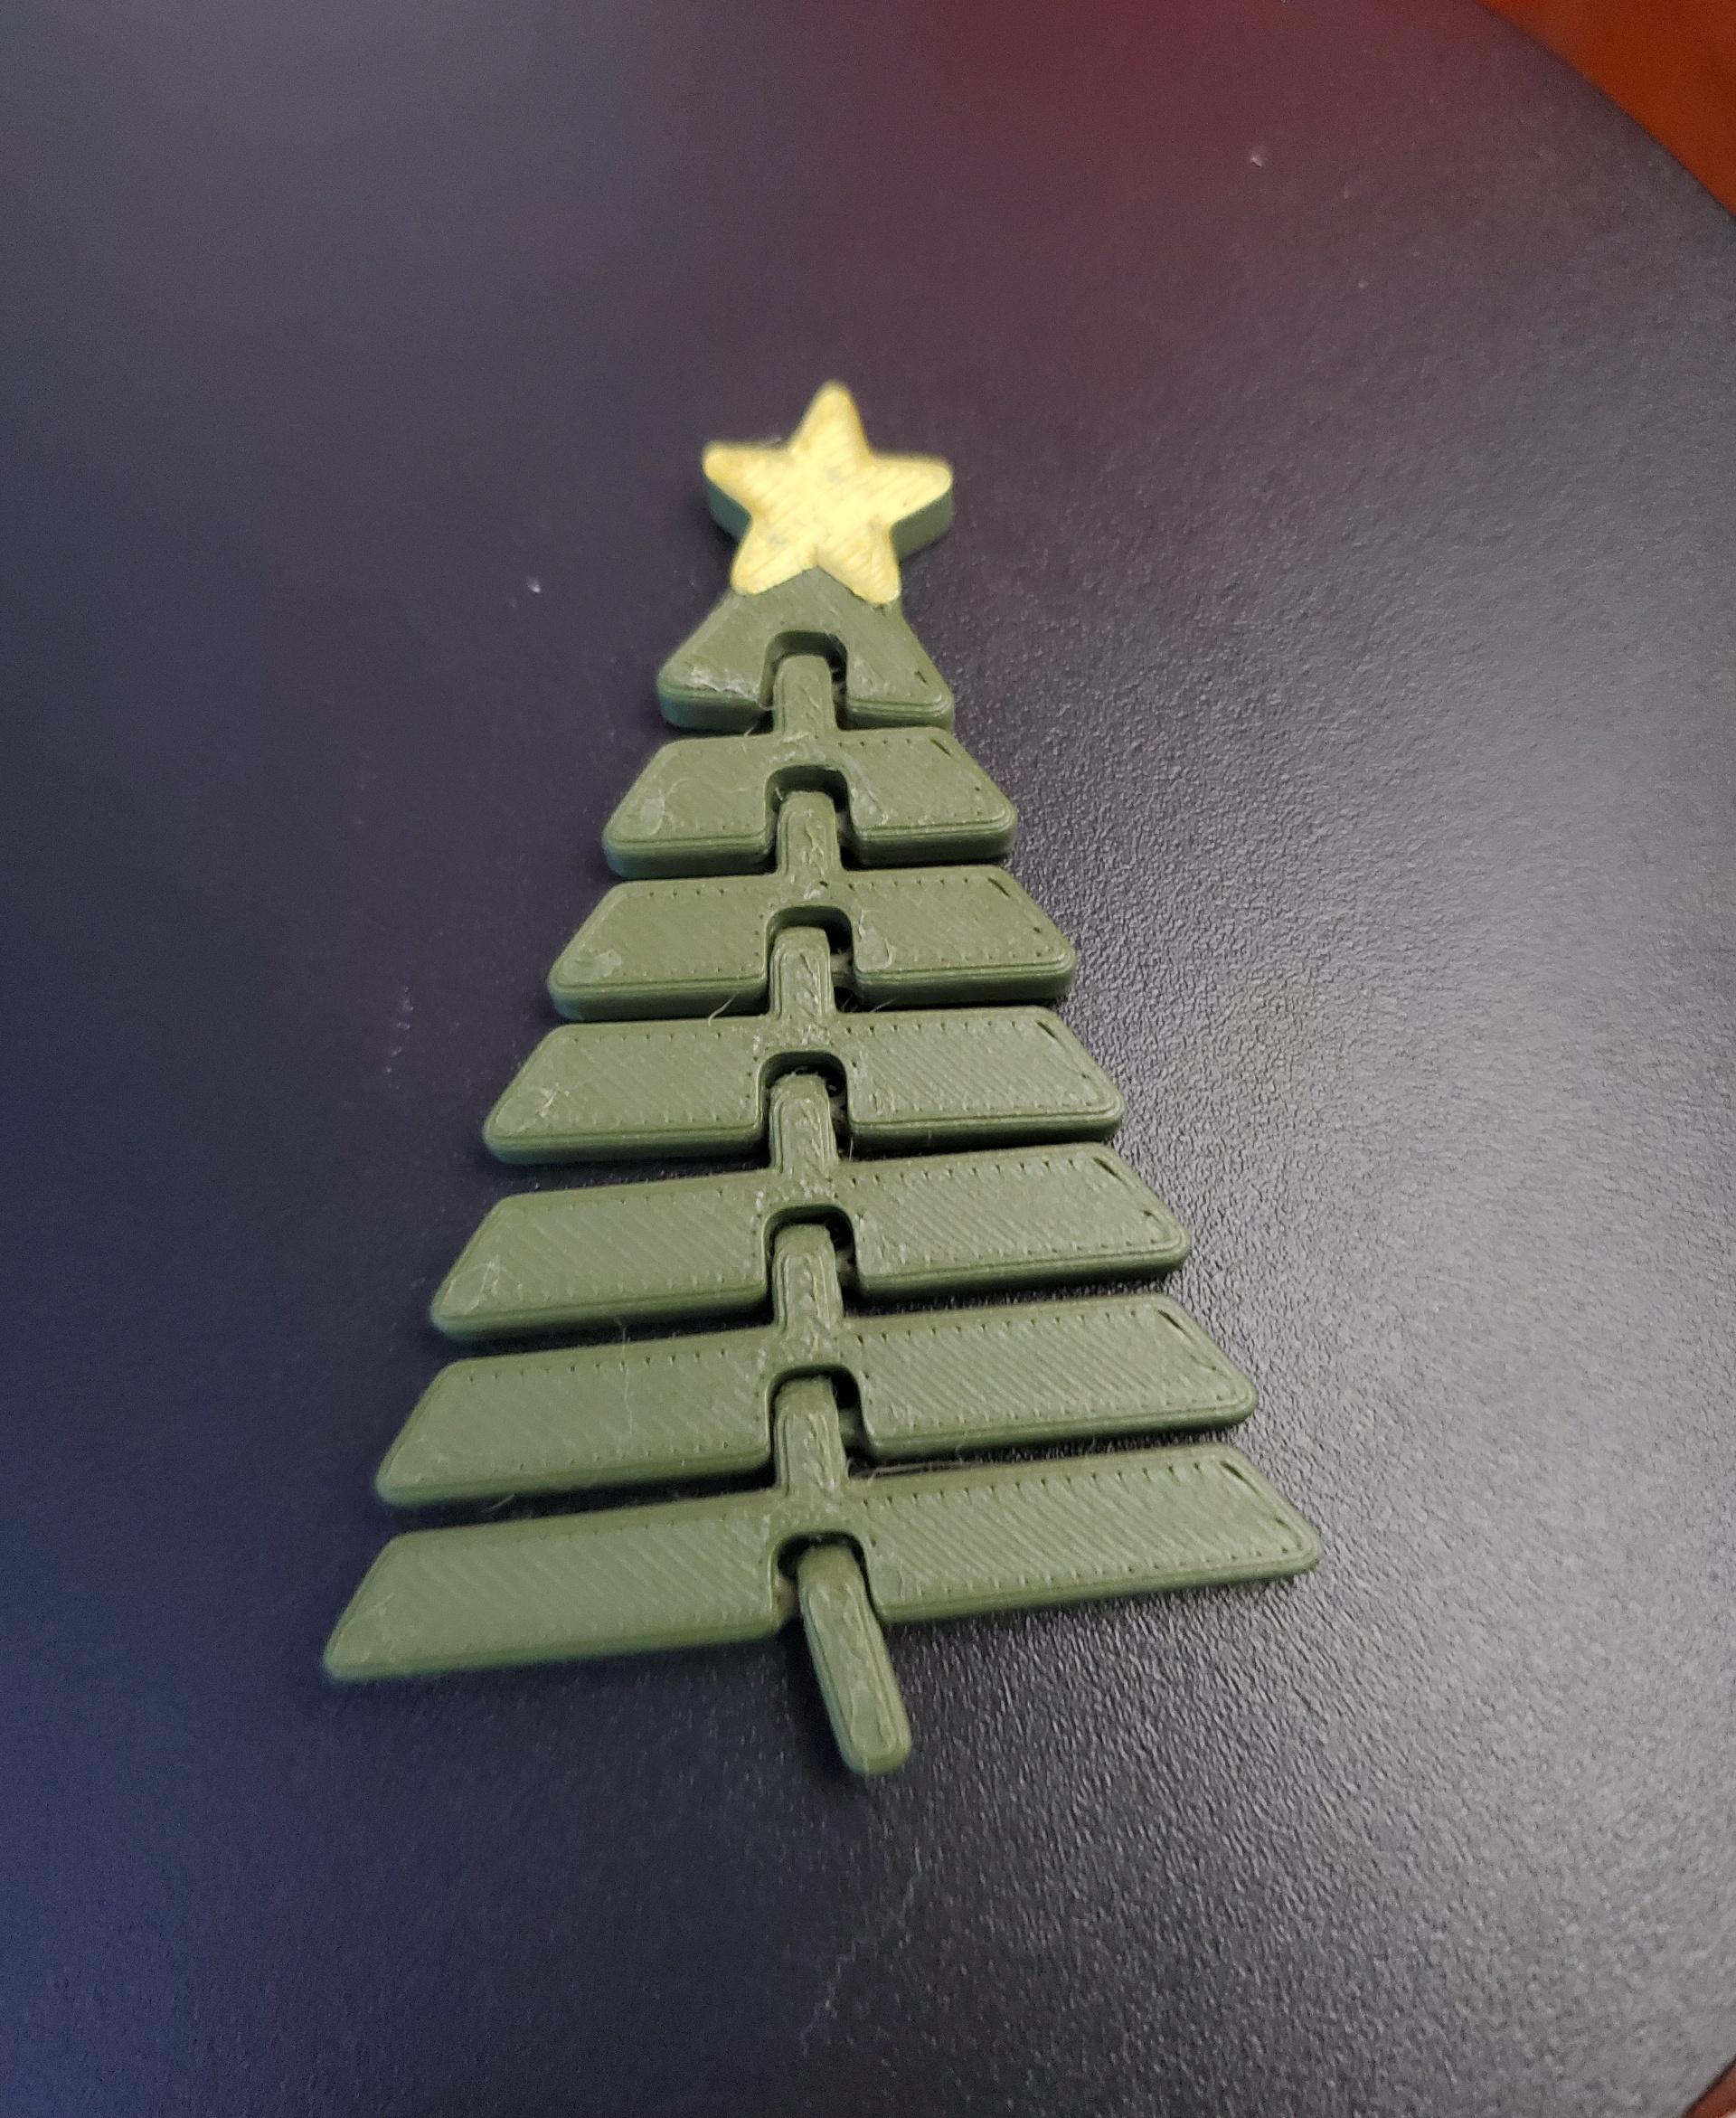 Articulated Christmas Tree with Star - Print in place fidget toy - 3mf - polyterra dark army green - 3d model